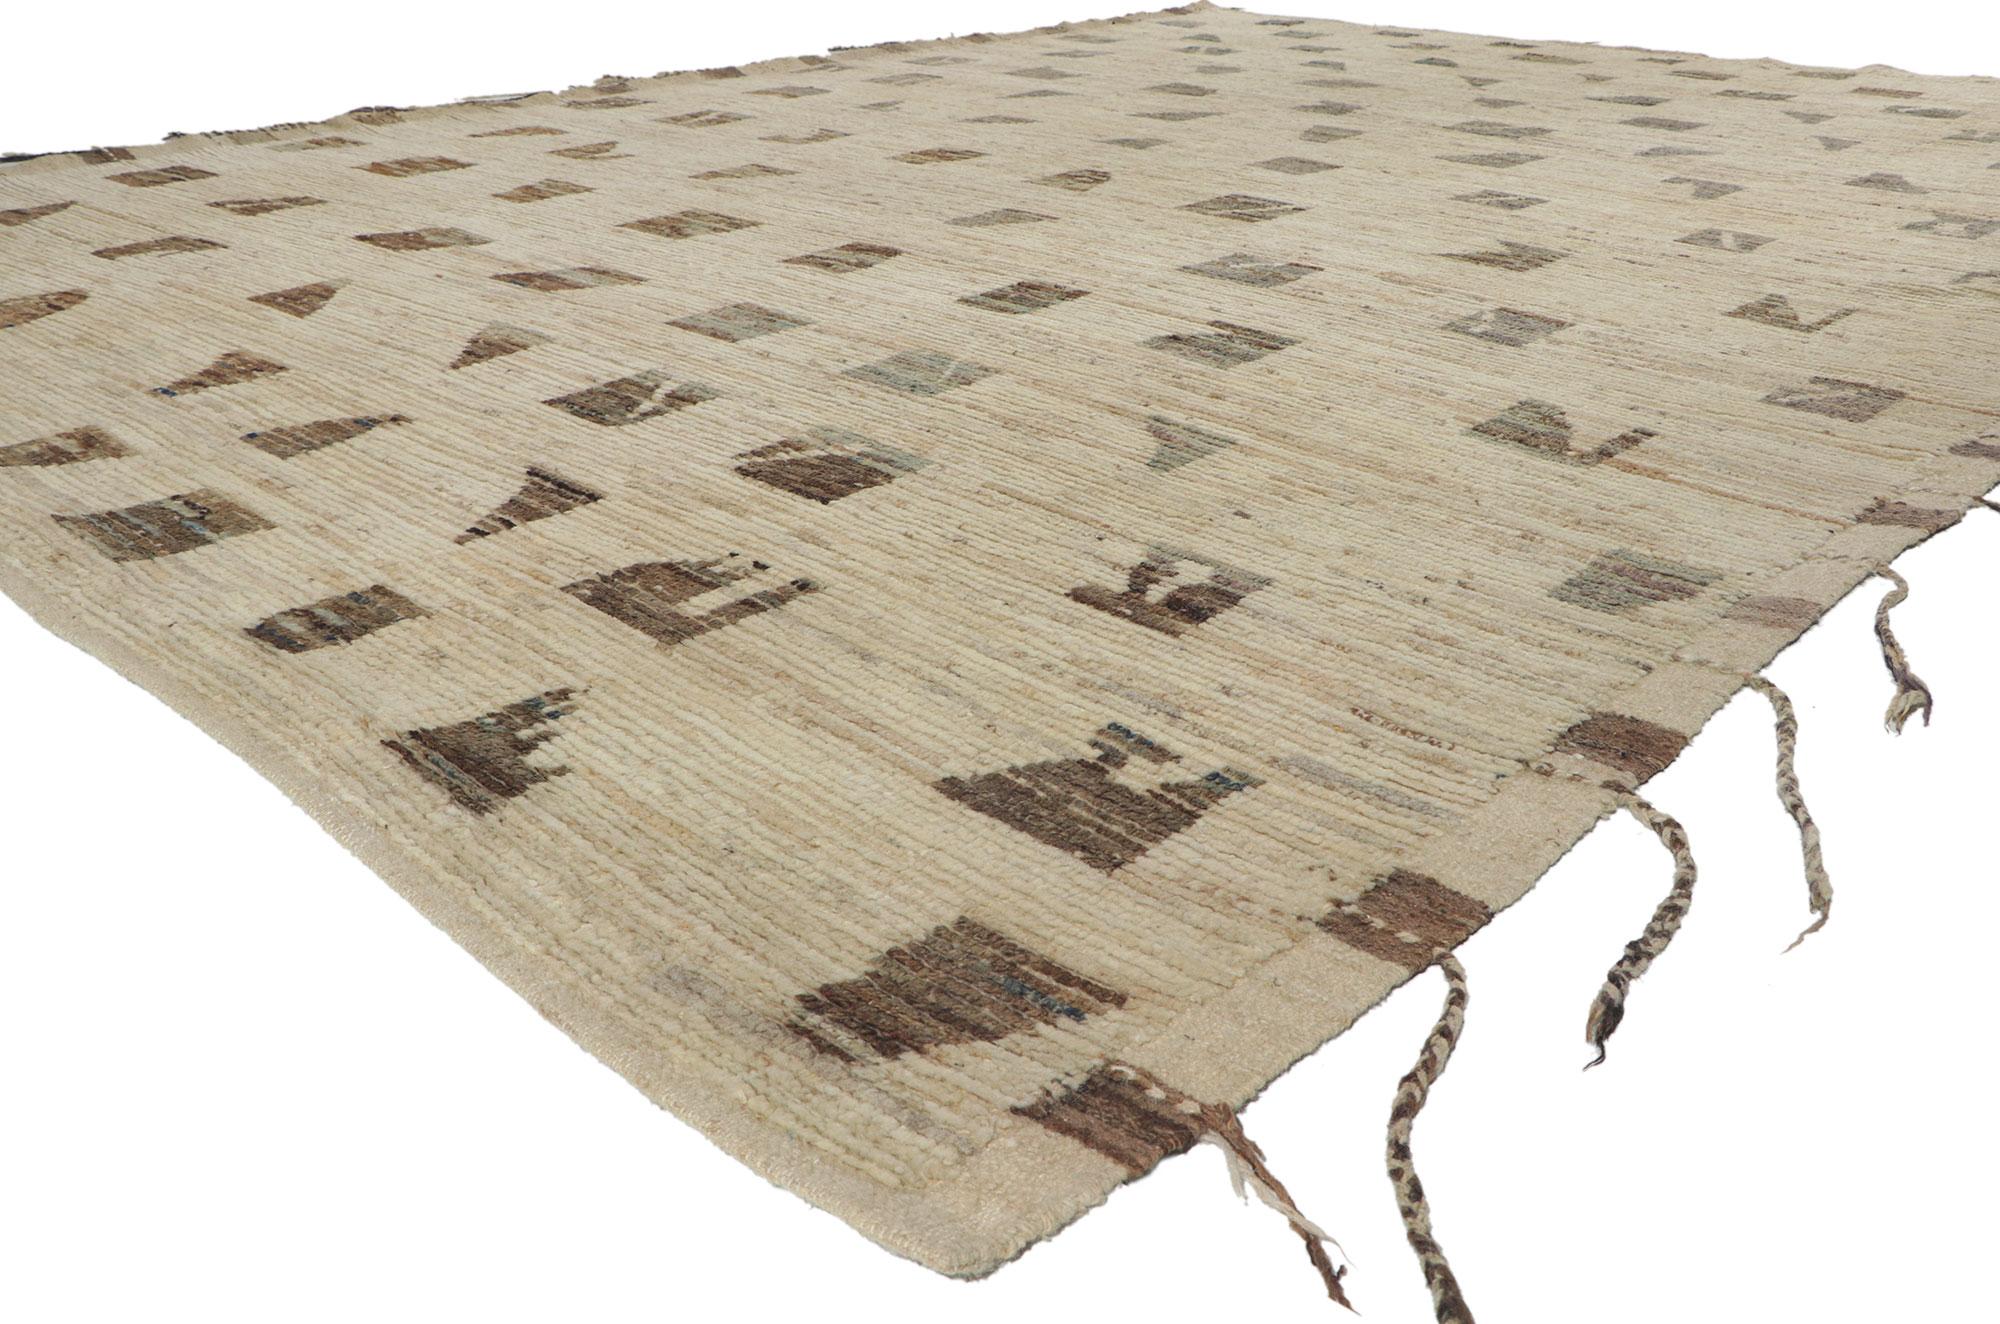 80812 Organic Modern Bauhaus Style Moroccan rug, 10'00 x 13'06. With its simplicity, incredible detail and texture, this hand knotted wool Moroccan rug is a captivating vision of woven beauty. The eye-catching geometric pattern and earthy colorway